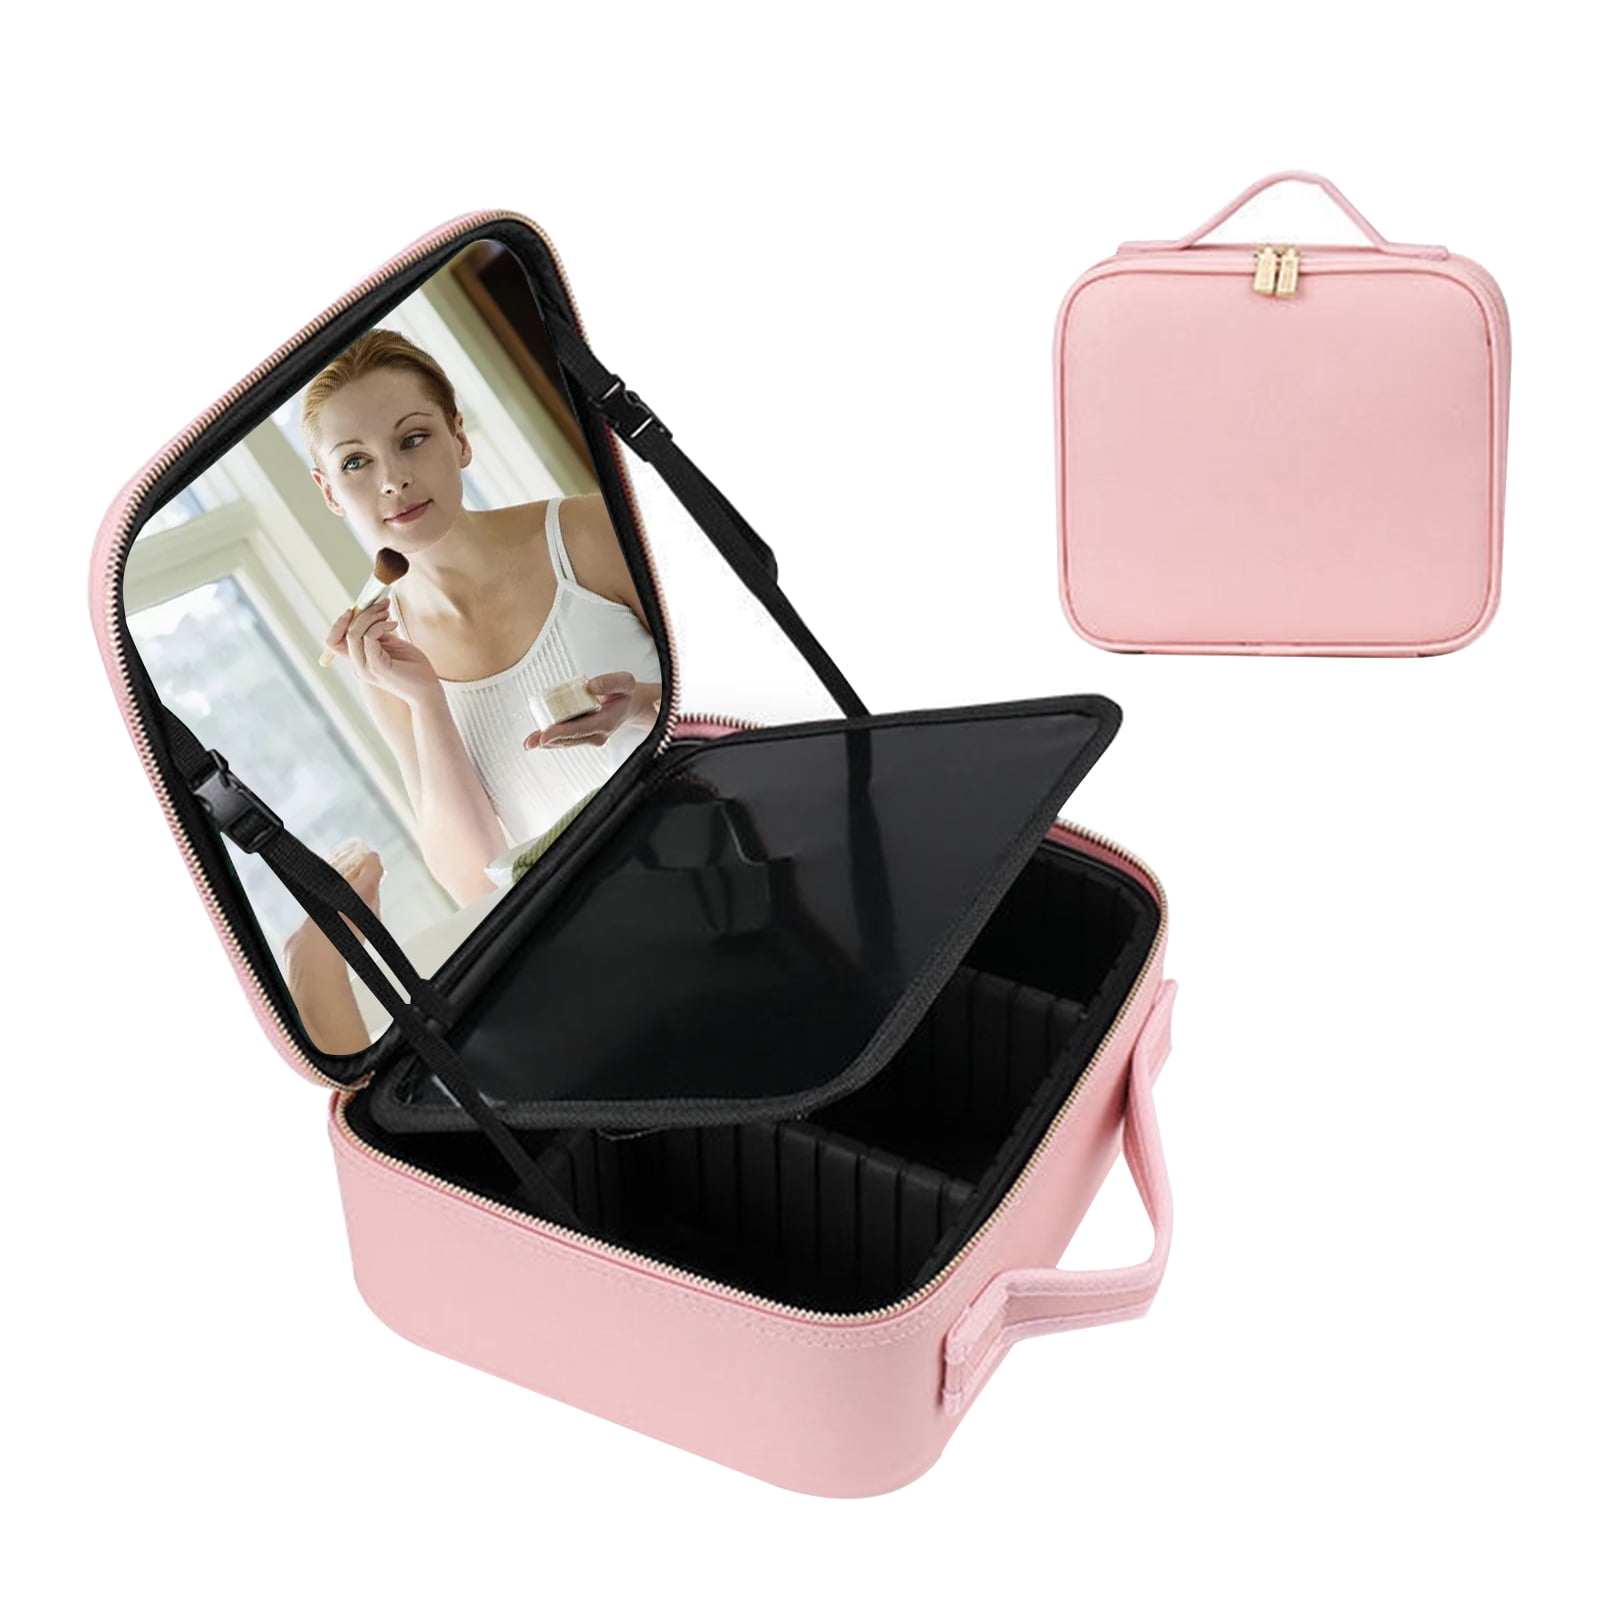 Chignon 13.5” X 9.5” Large Makeup Case with Lighted Up Mirror, Professional  Travel Vanity Cosmetic Train Case, 3 Led Colors and Adjustable Brightness